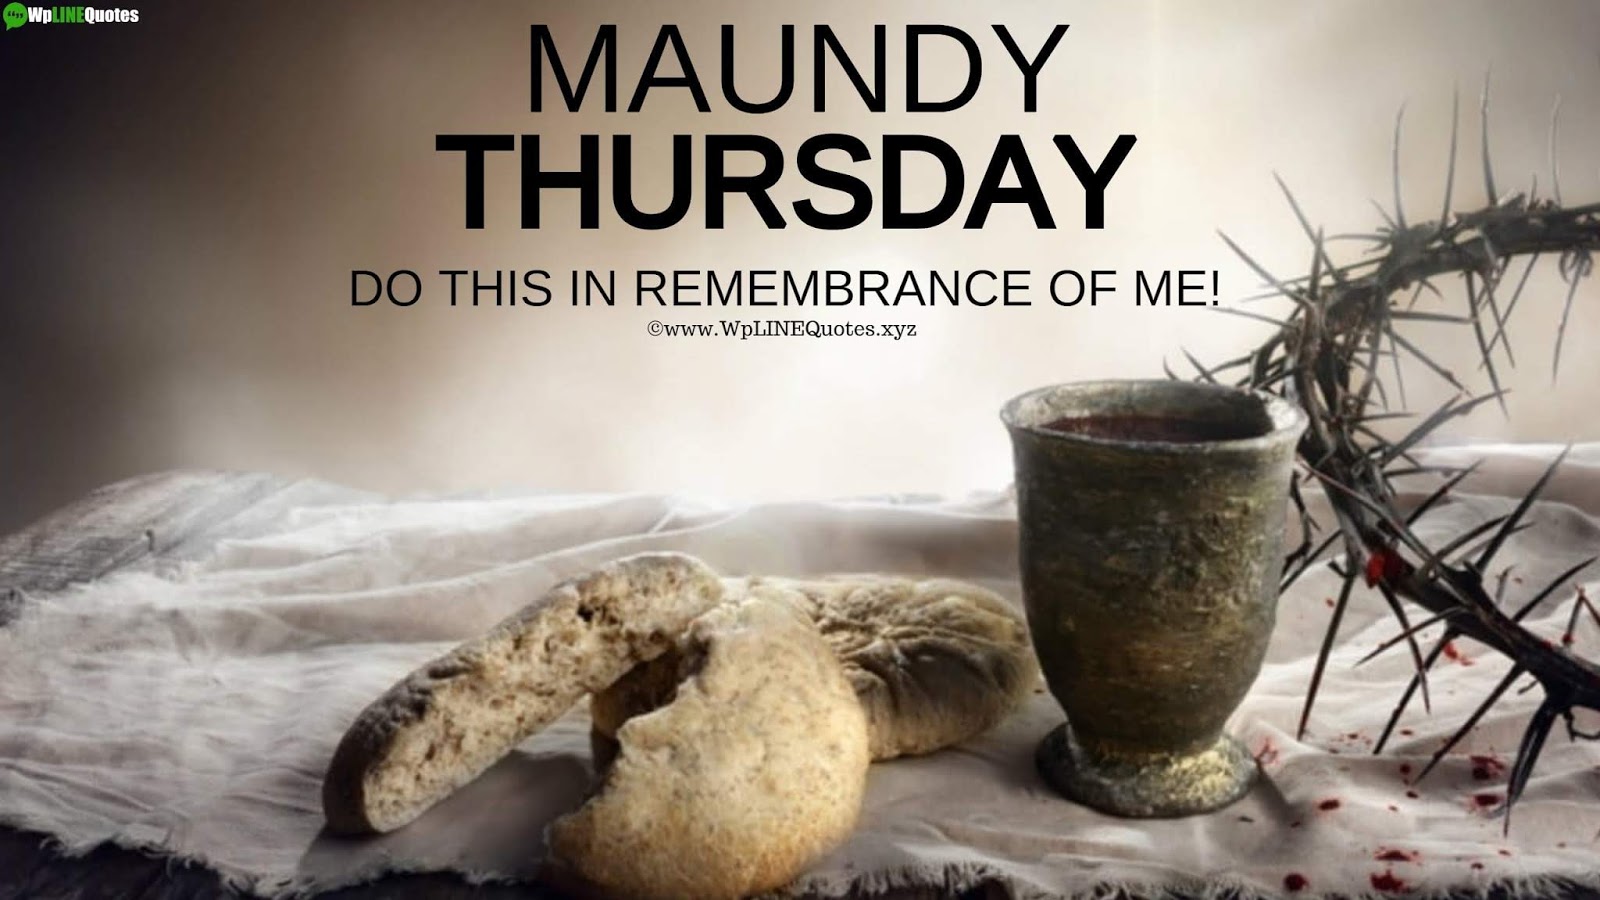 Download Free 100 + maundy thursday Wallpapers